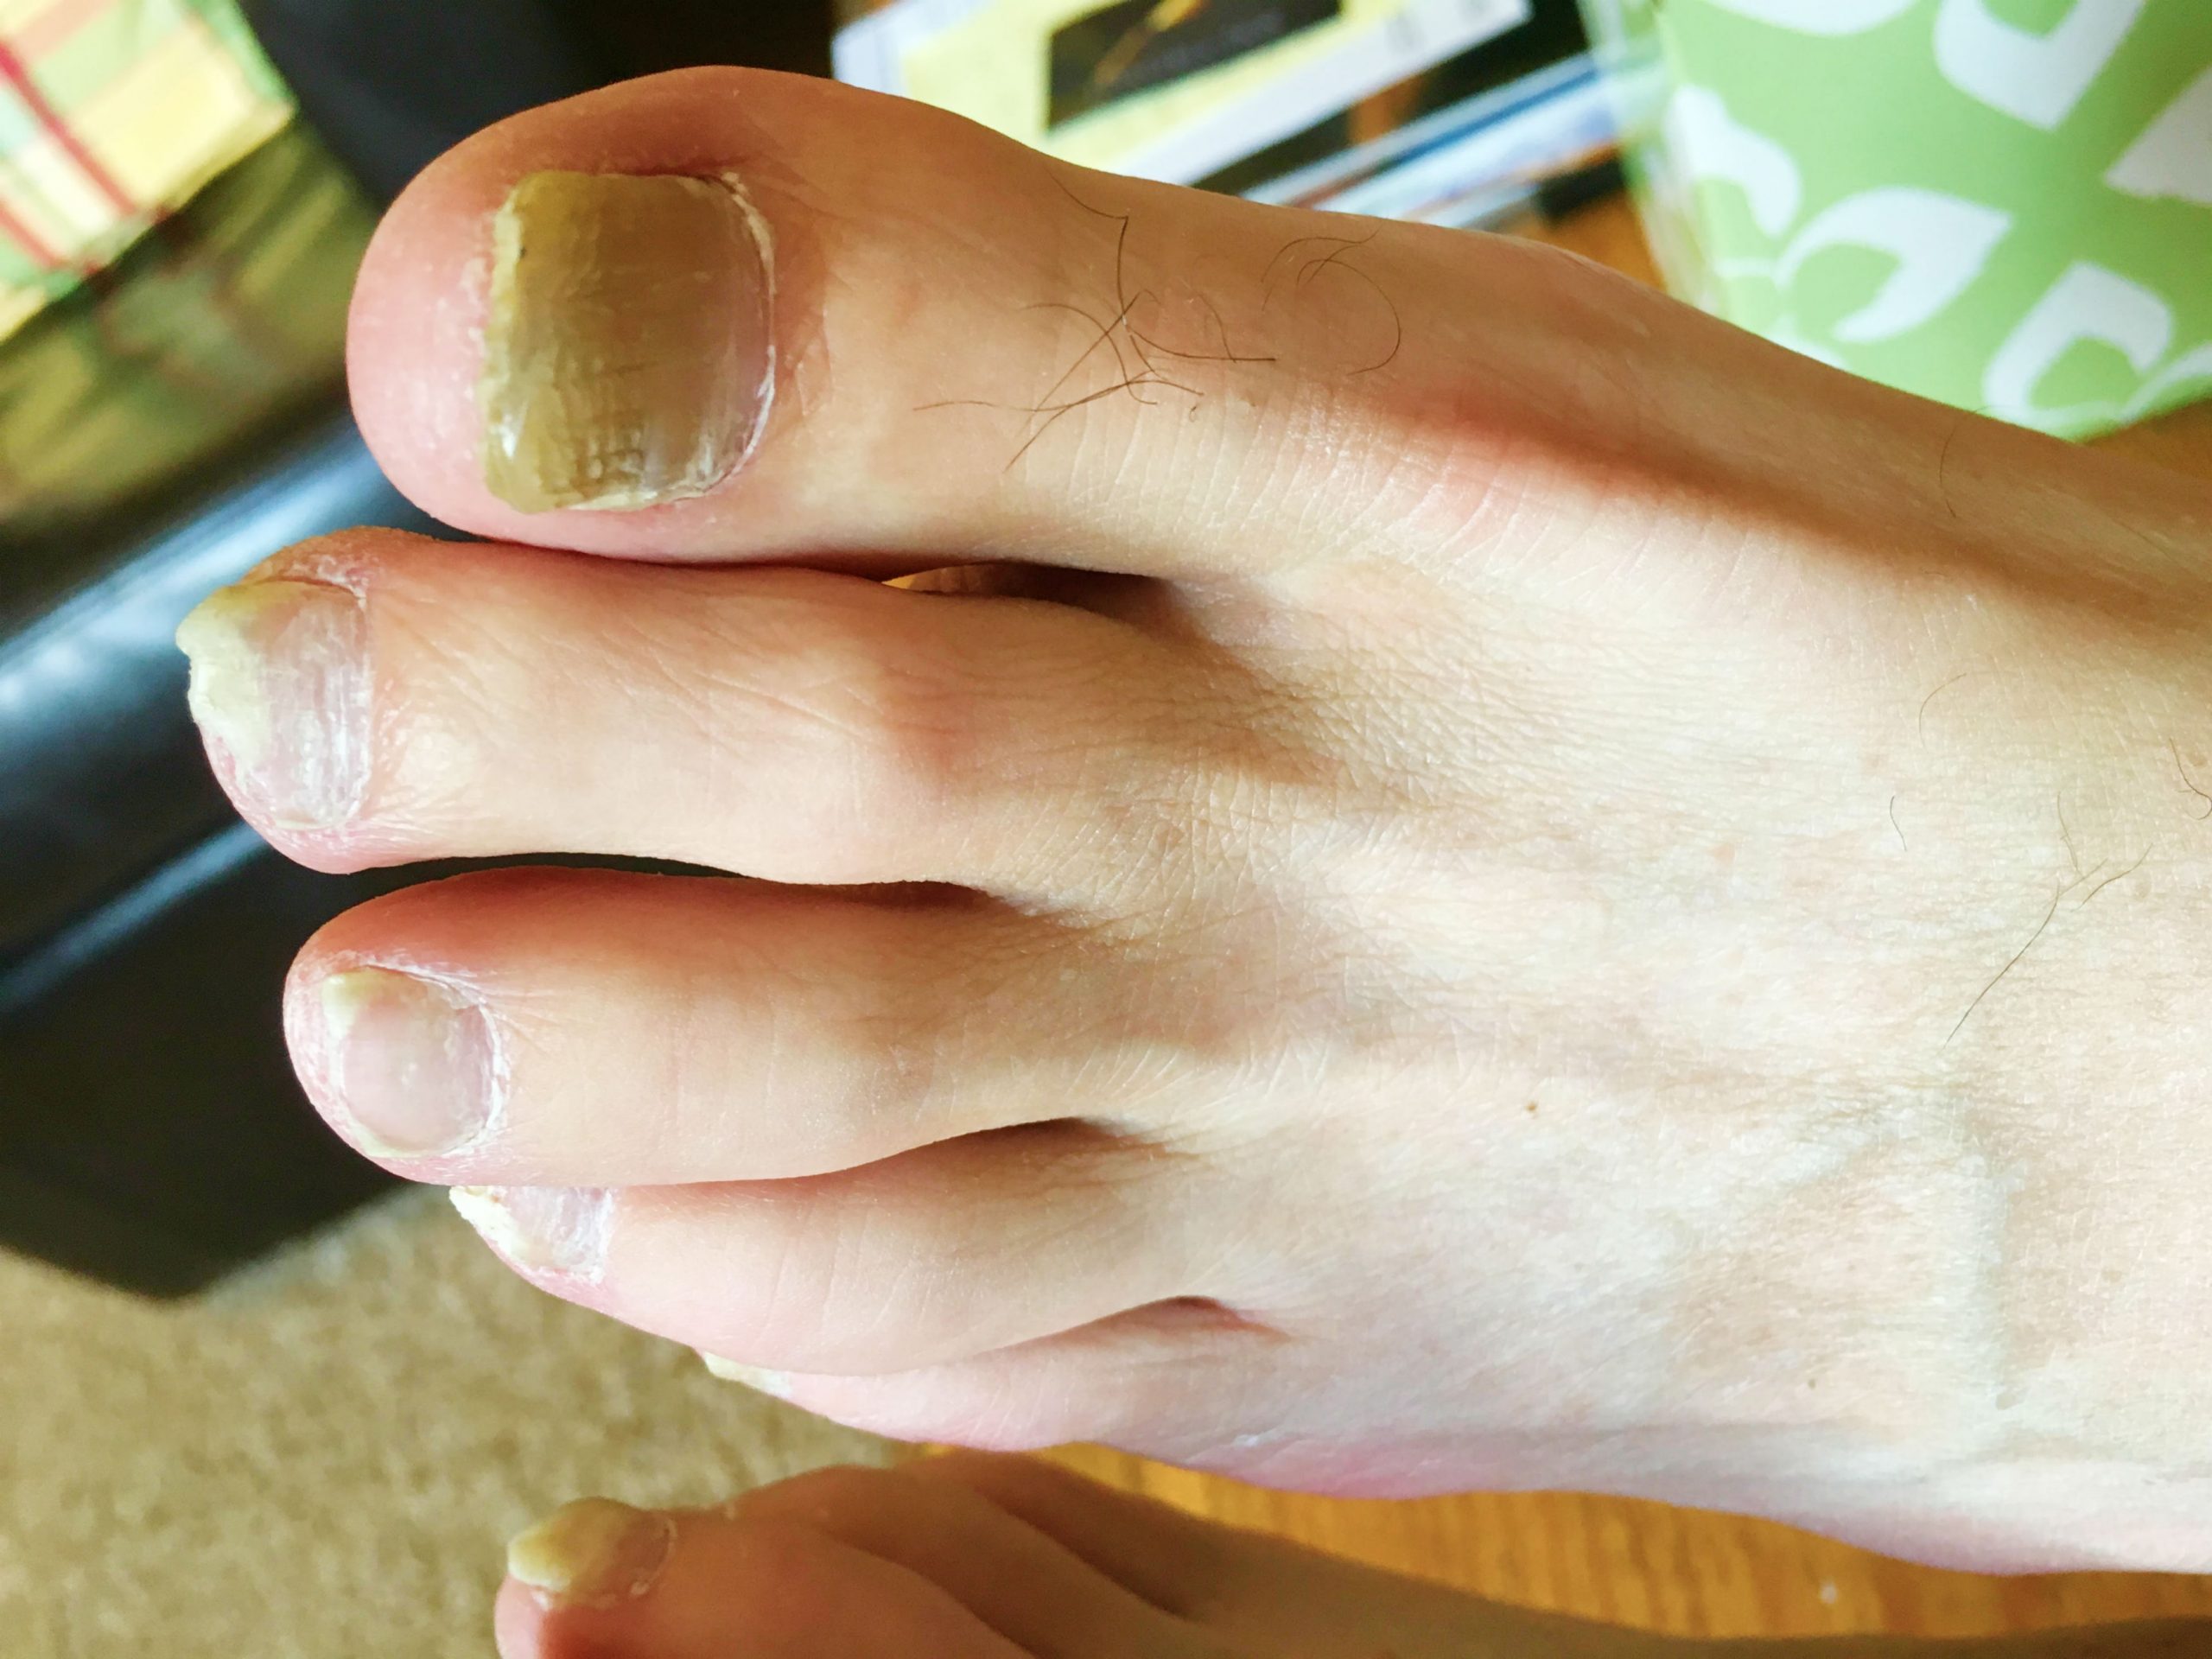 Can Toenail Fungus Spread To Other Parts Of The Body?